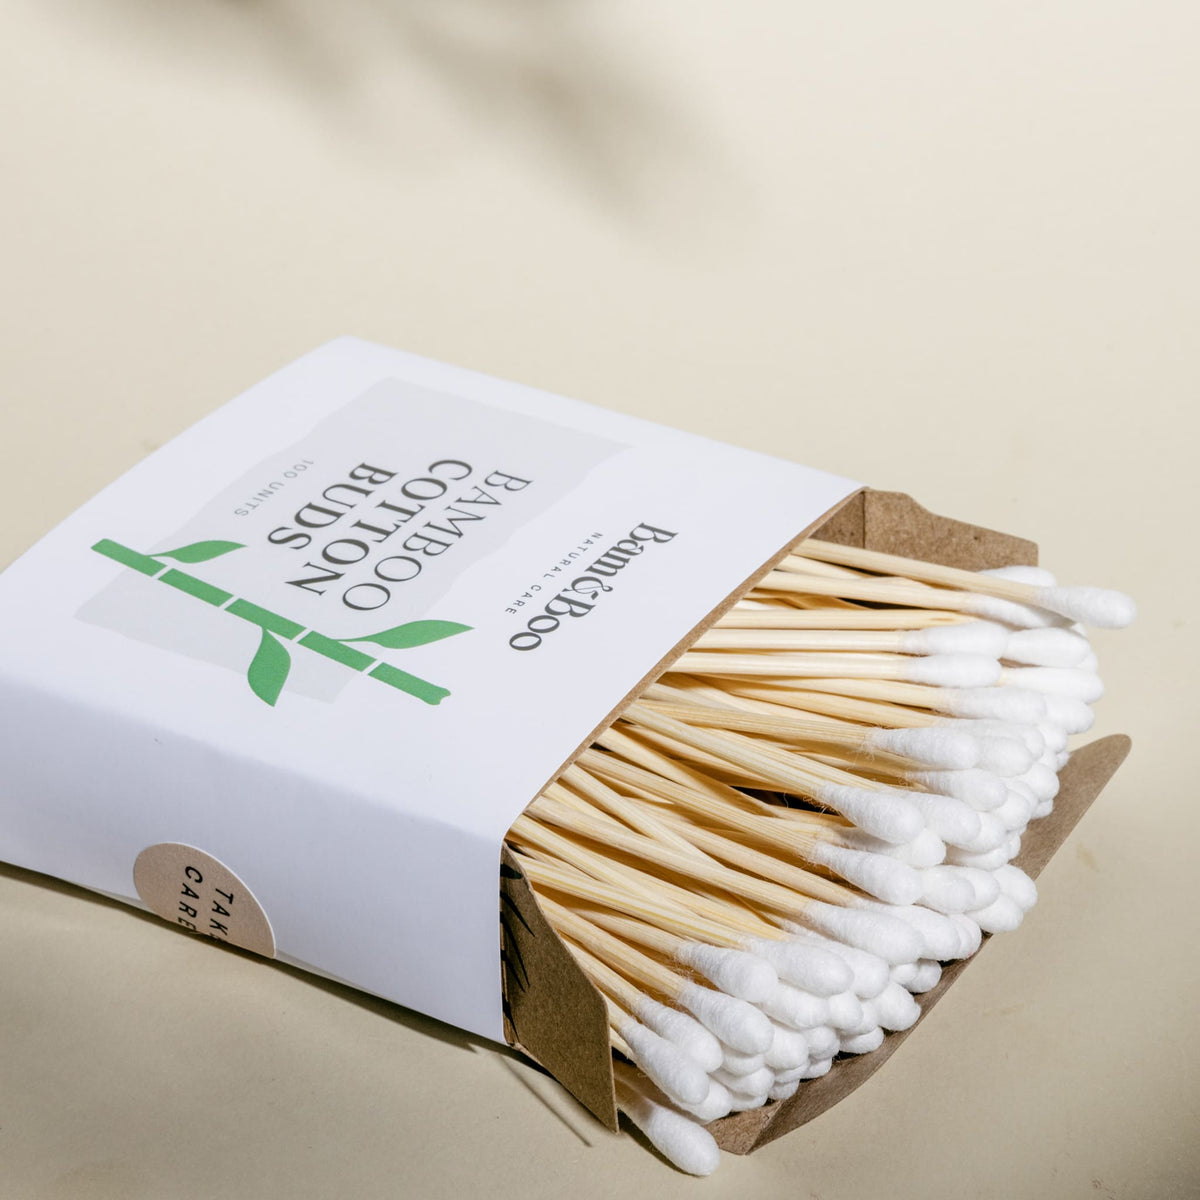 COTTON BUDS - Bam&amp;Boo - Eco-friendly, vegan, sustainable oral and personal care